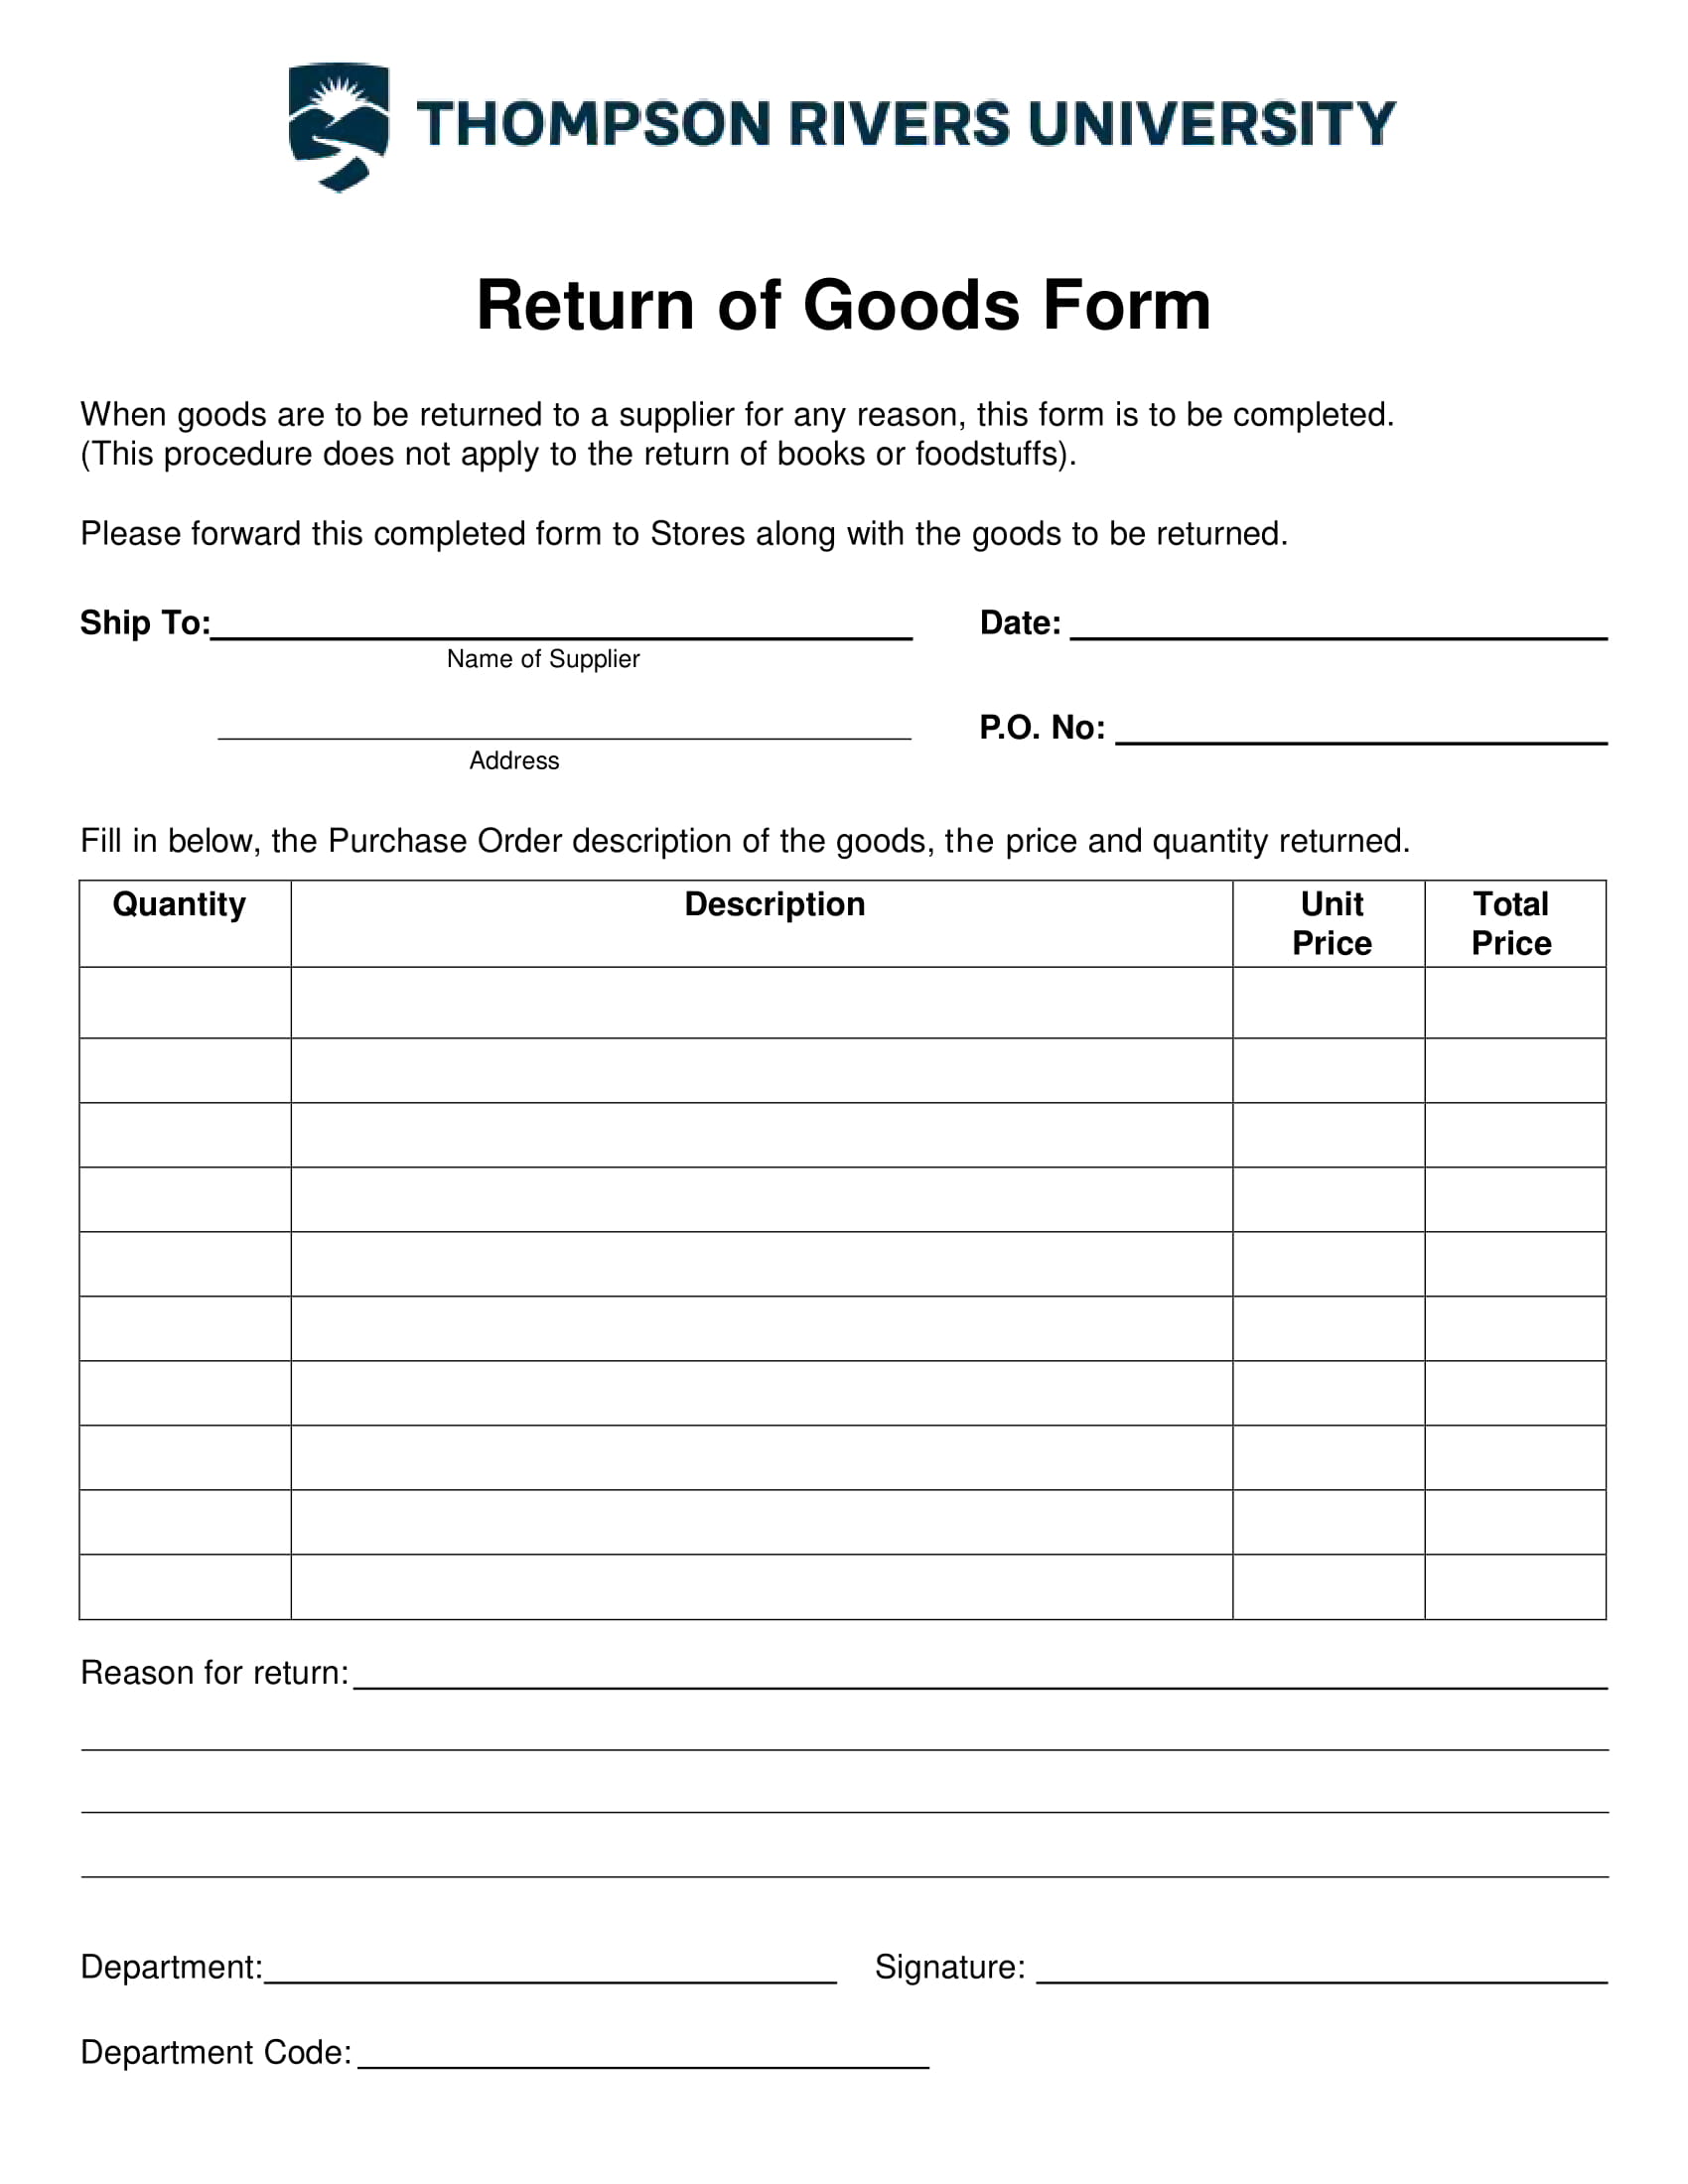 return of goods form for customer return reporting example 1